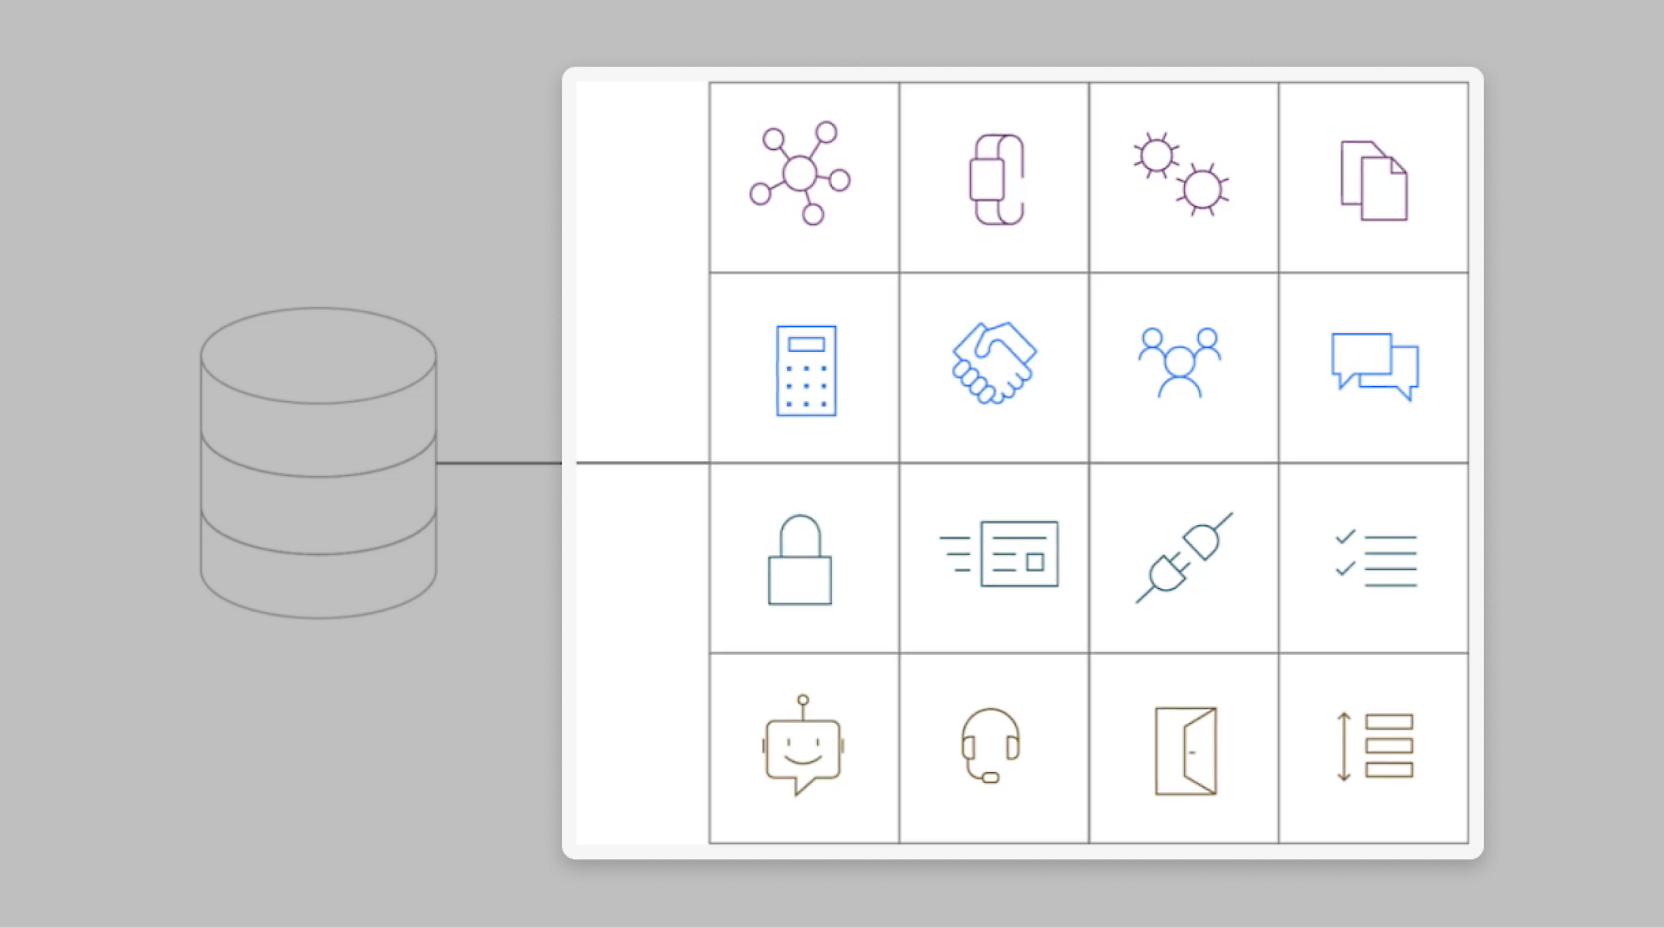 Grid of 16 icons representing various business and technology concepts, including networking, communication, security, and analytic